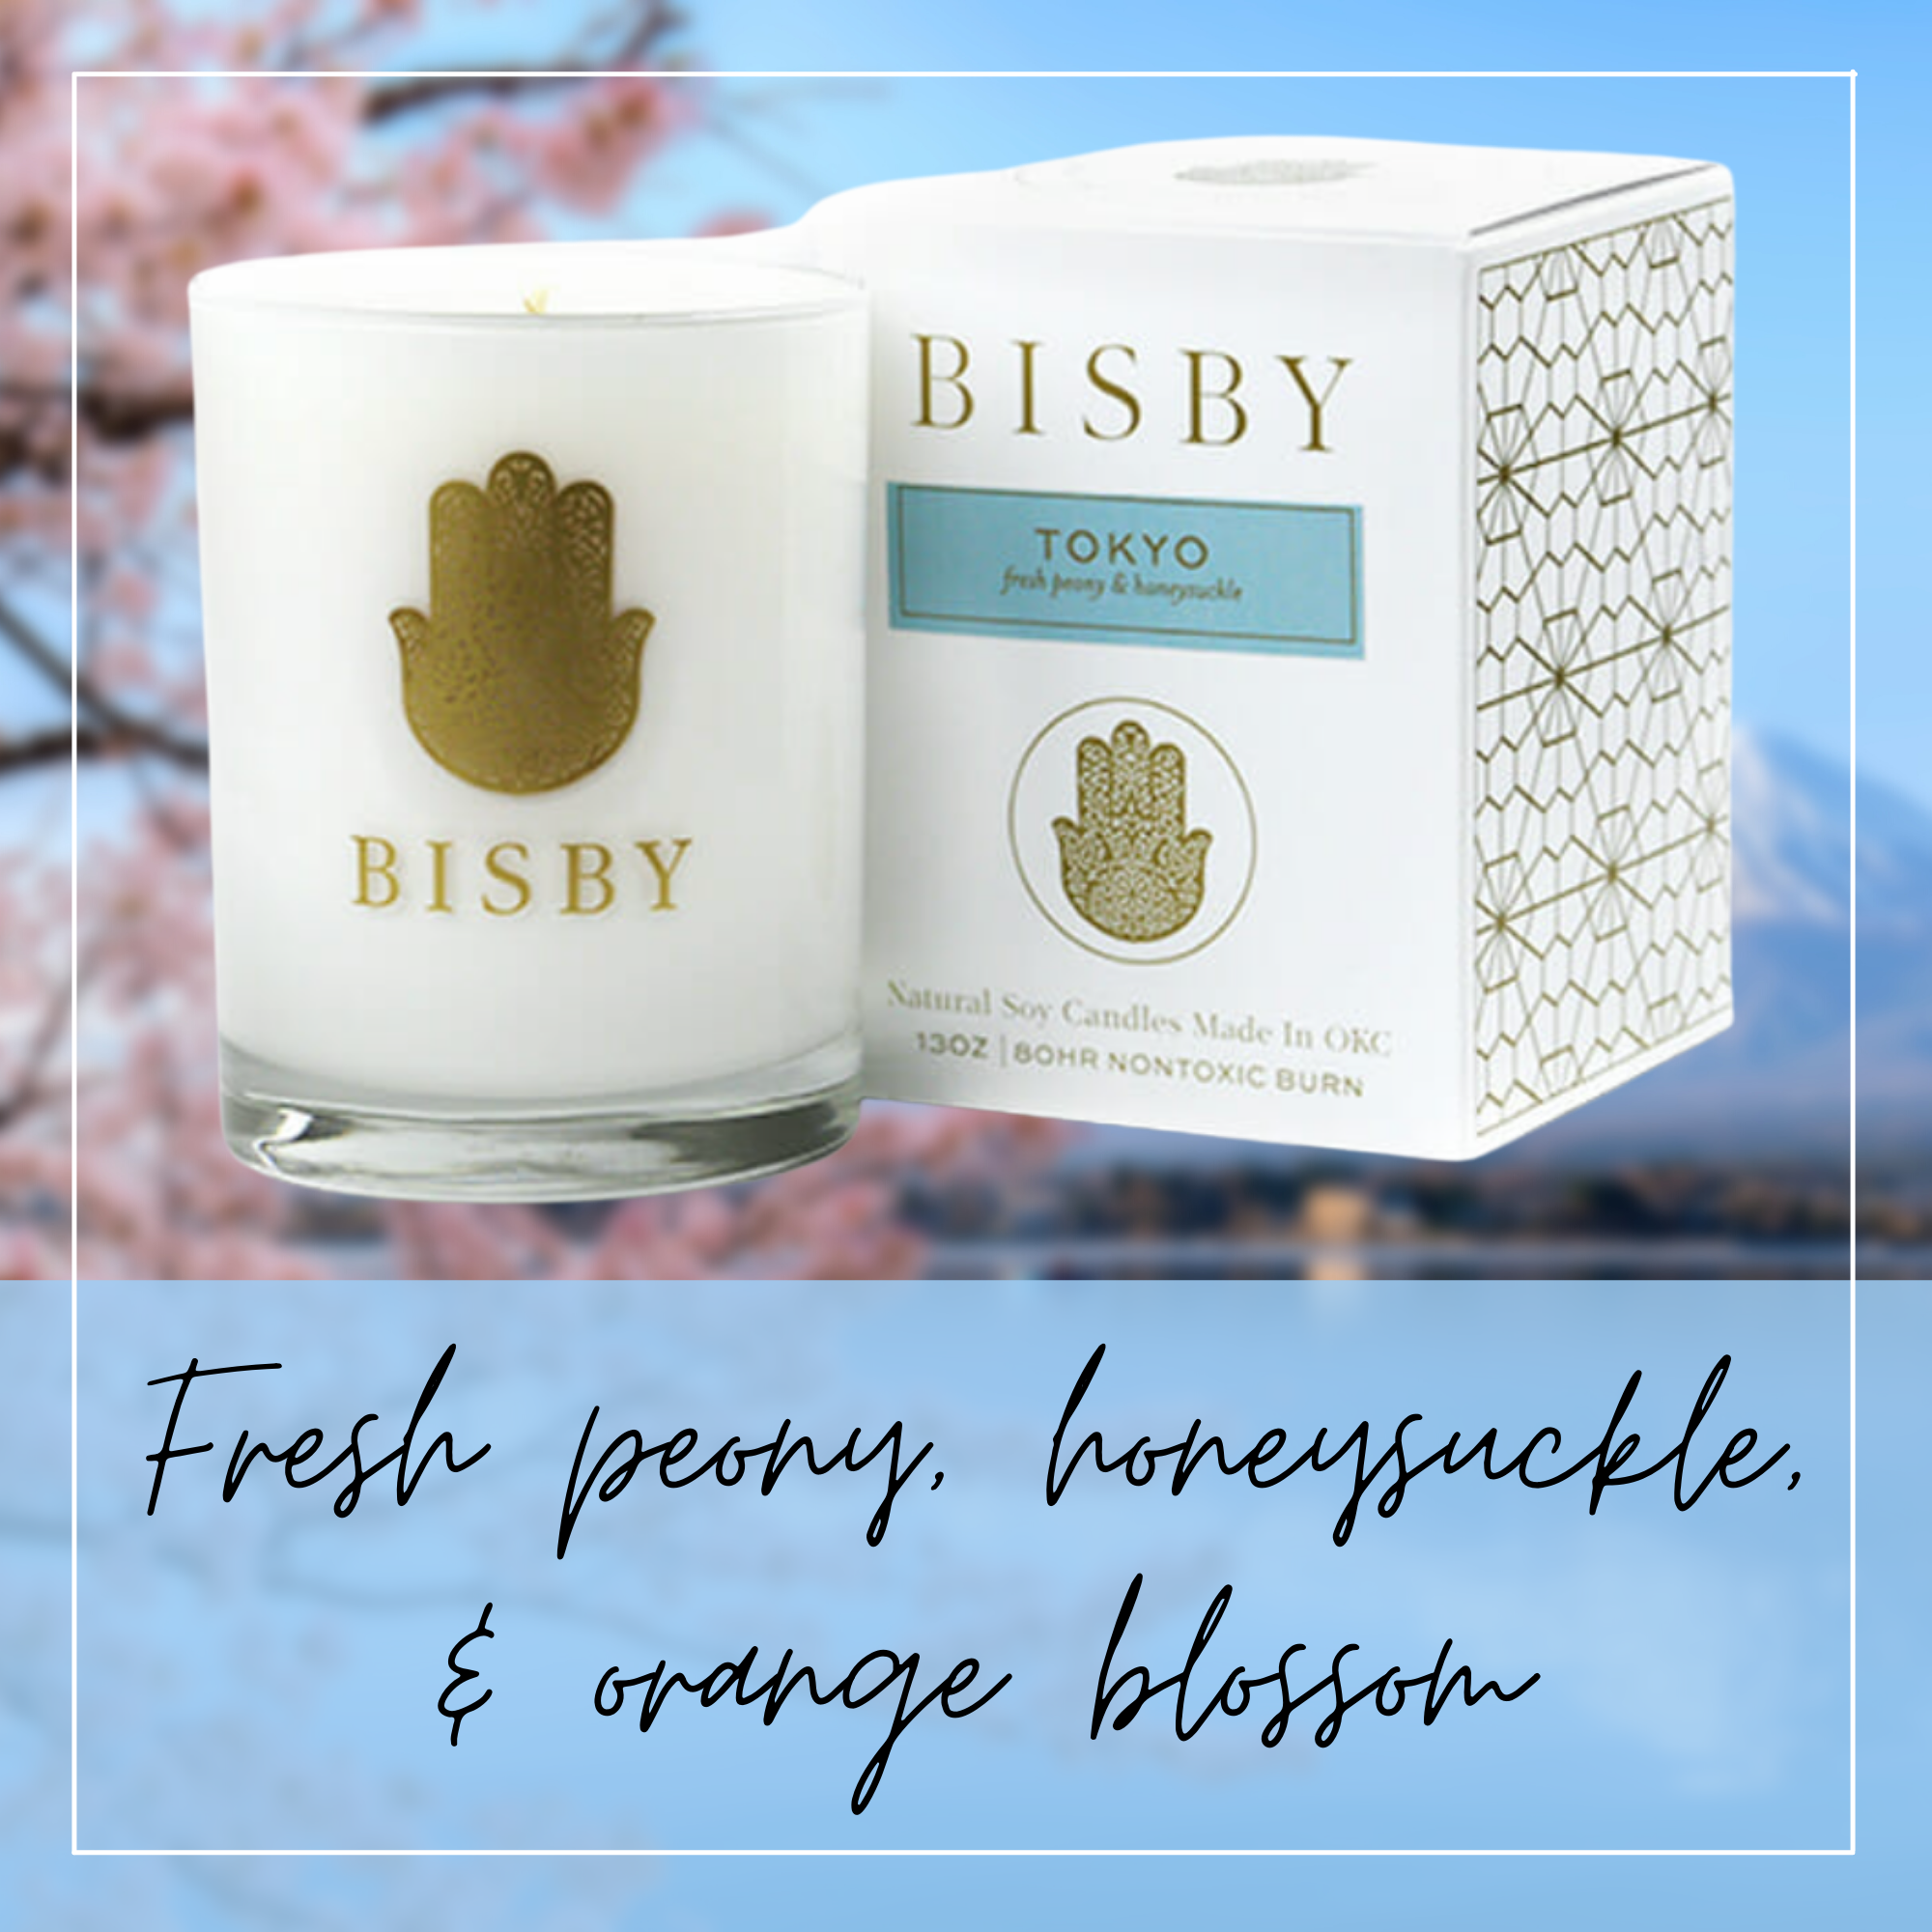 Bisby Hand-Poured Soy Candles - Global Collection Tokyo 